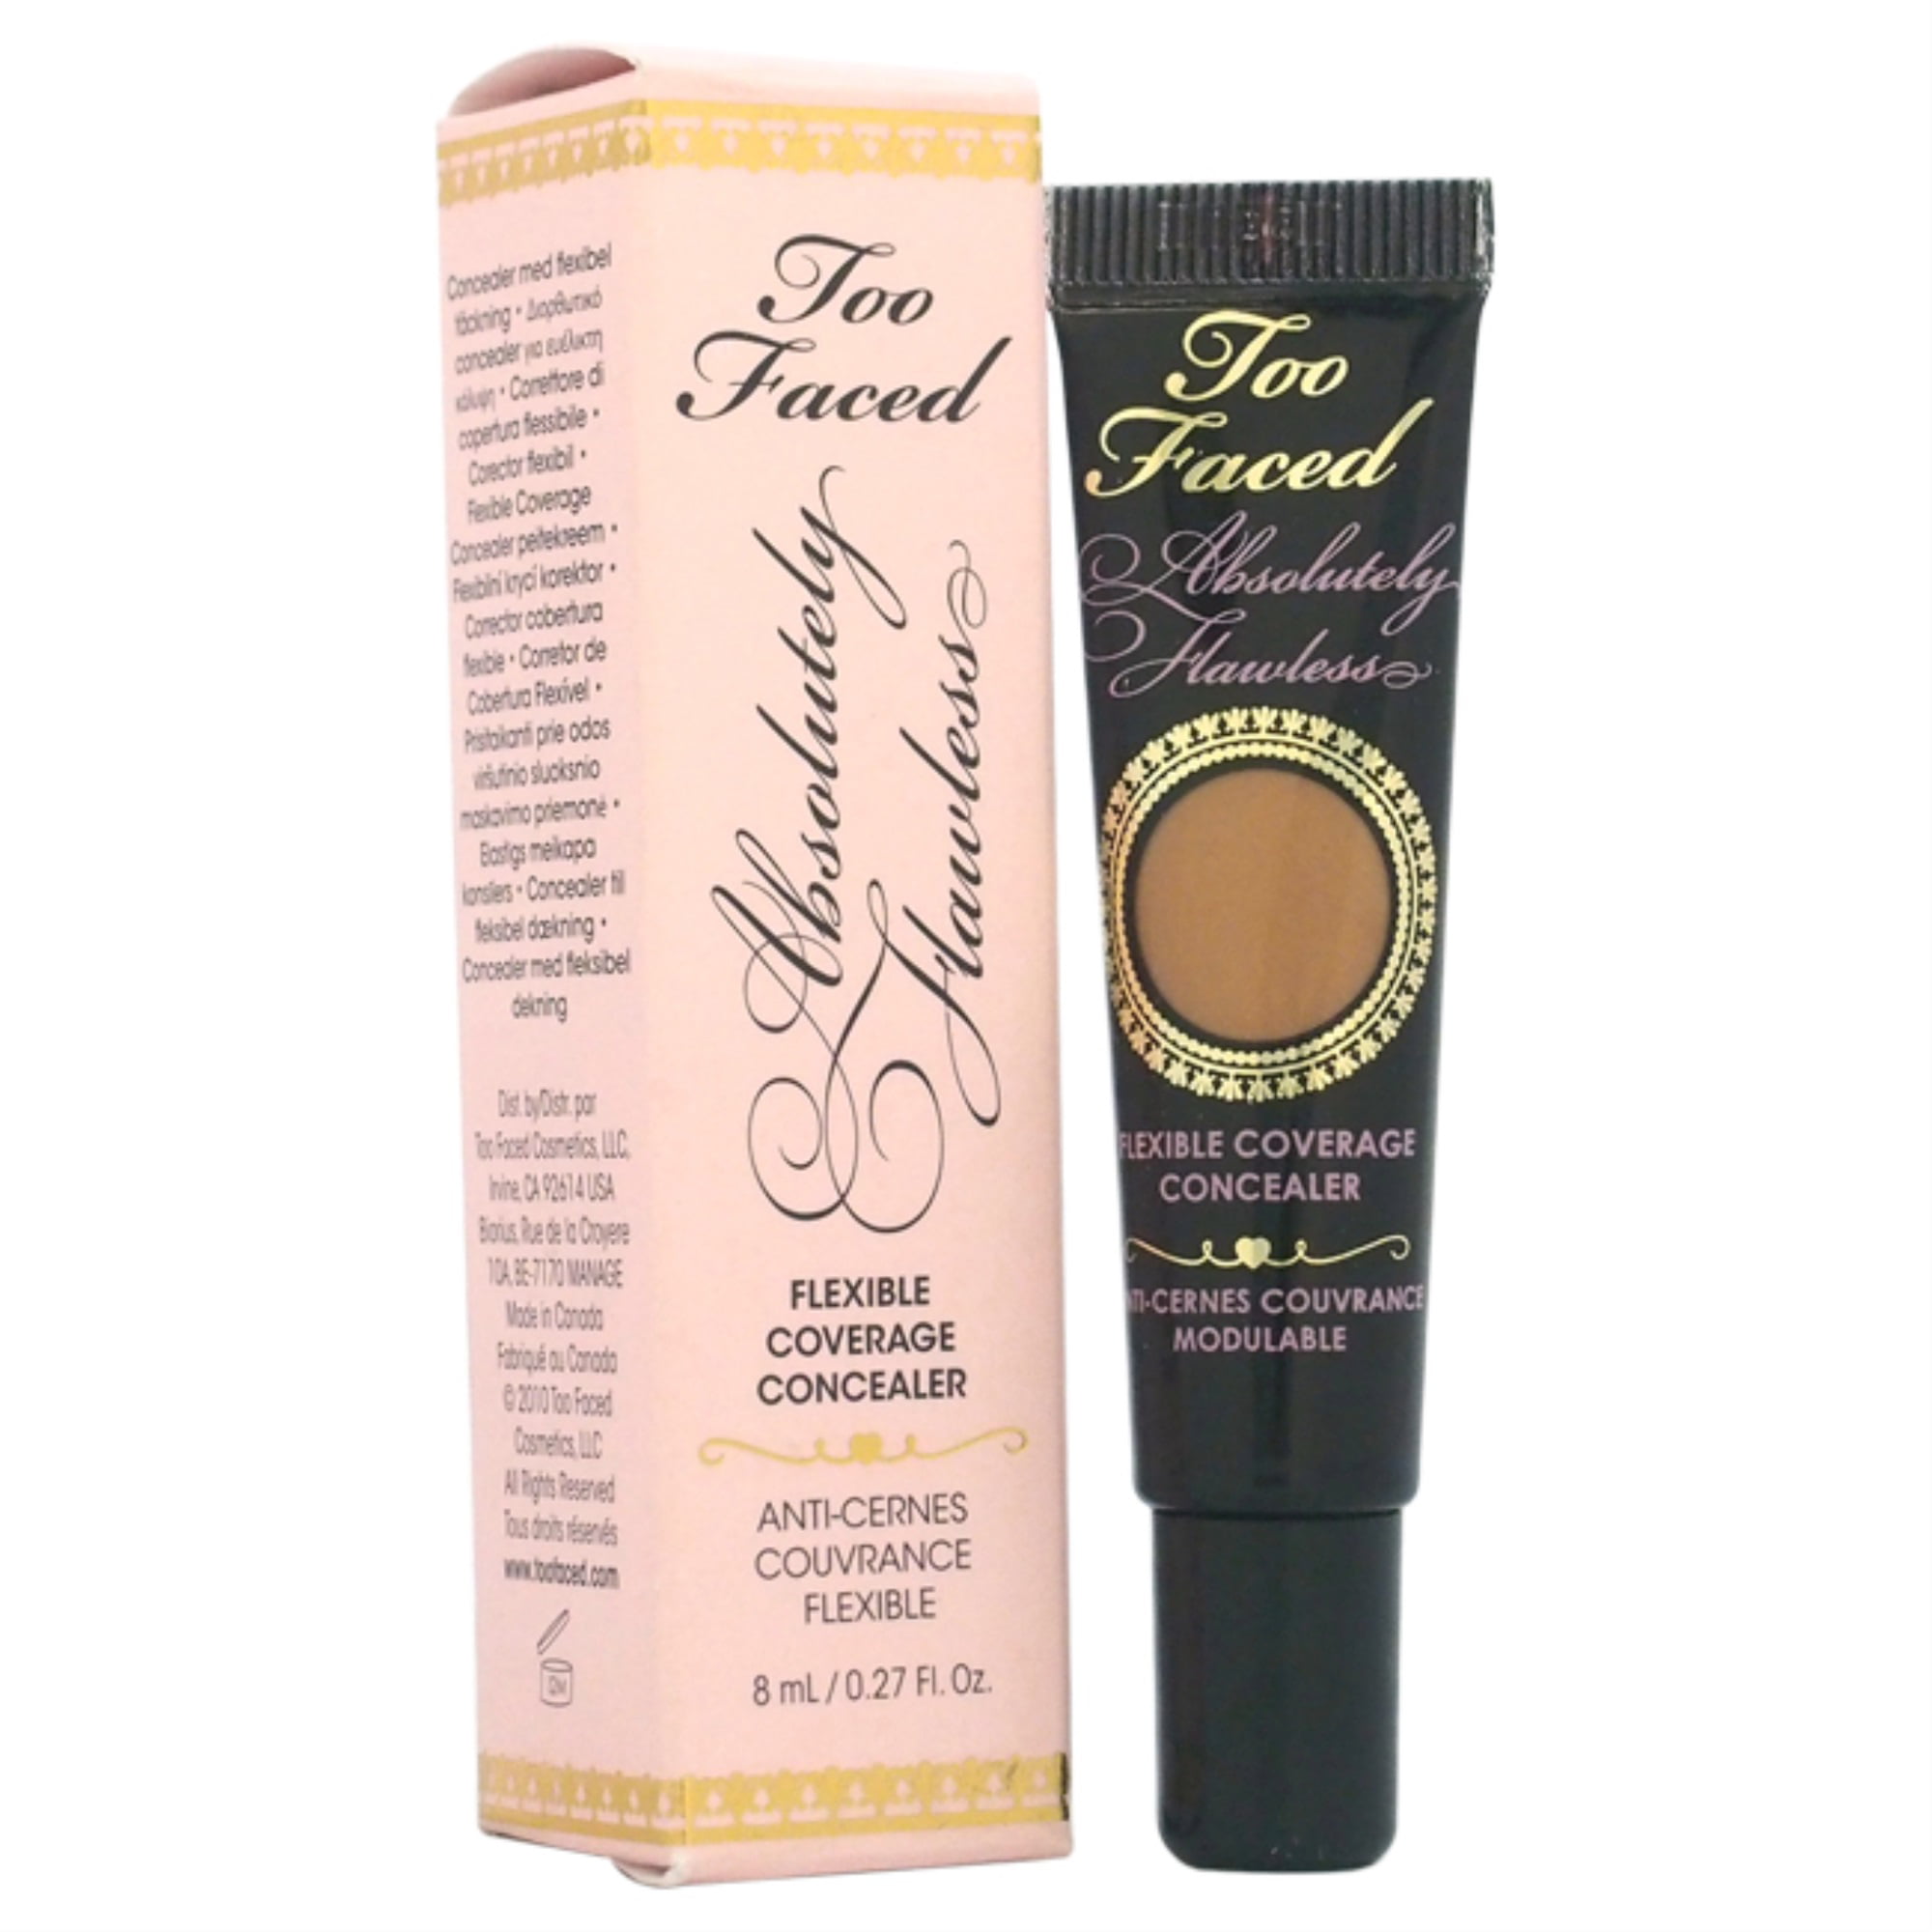 Absolutely Flawless Flexible Coverage Concealer - Honey by Too Faced for - 0.27 oz Concealer - Walmart.com